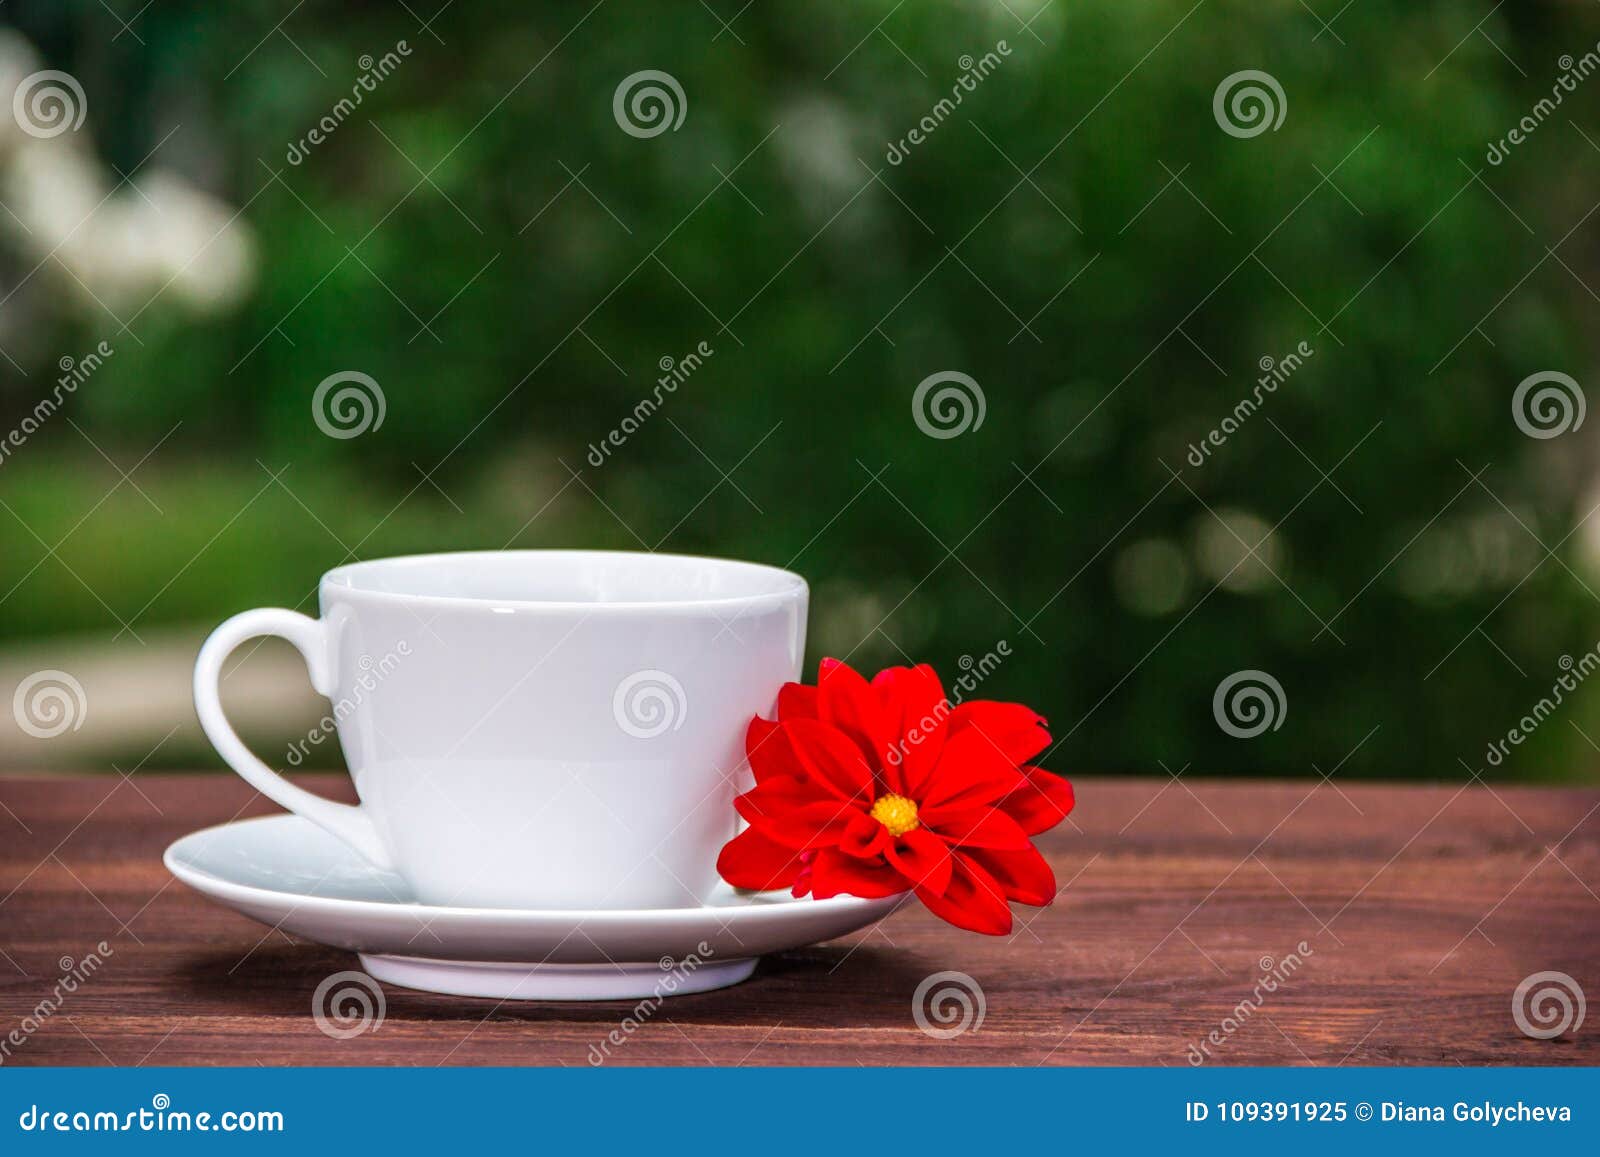 white-cup-tea-red-flower-wooden-table-green-garden-copy-space-blurred-background-109391925.jpg